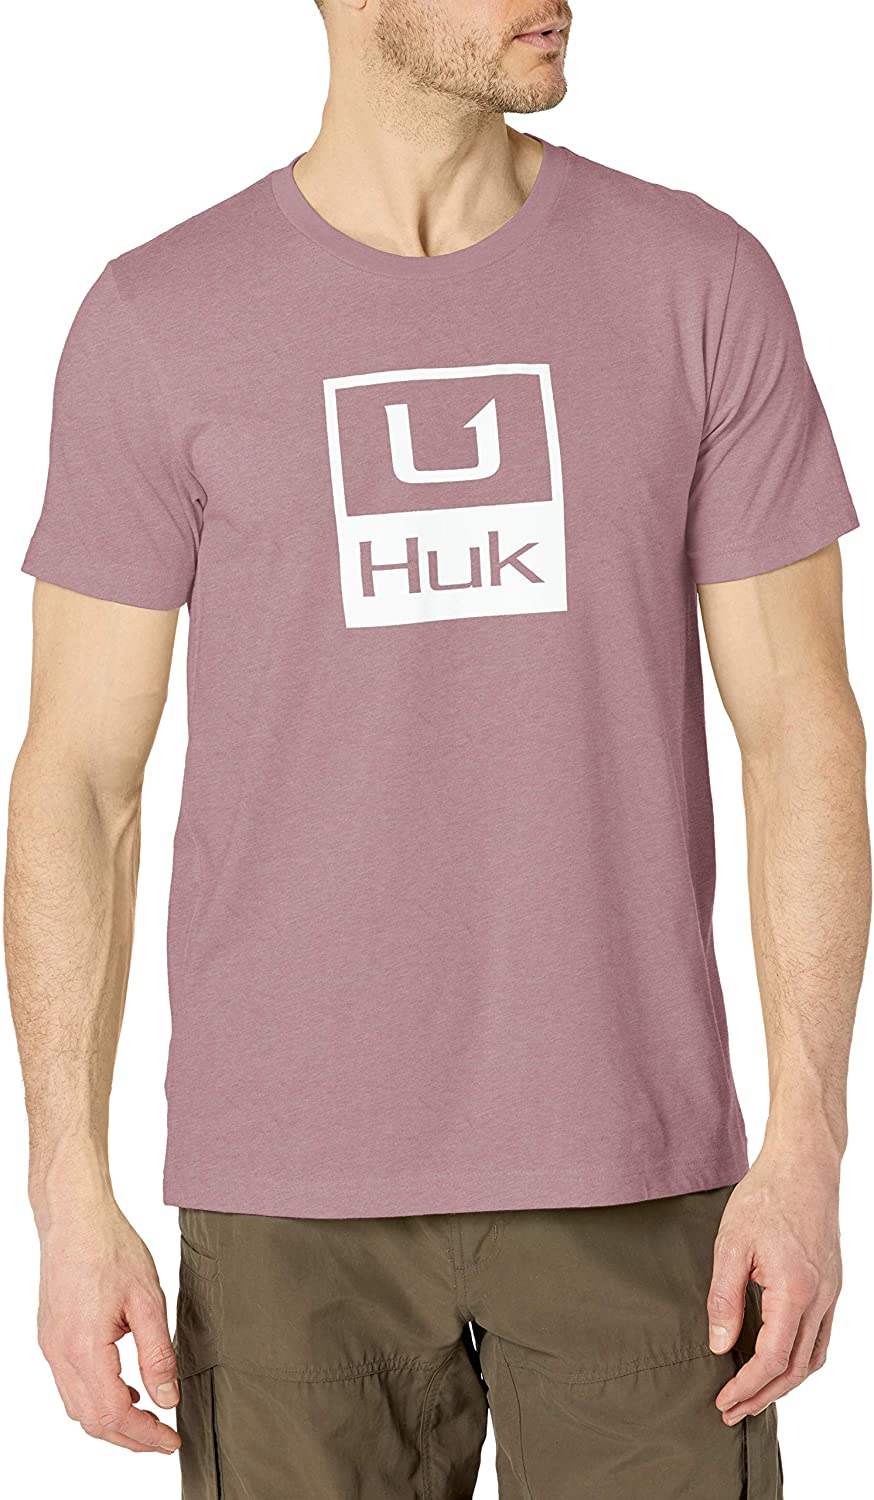 Men's Huk Huk'd Up Performance Tee in Lavender Blue Heather from the front